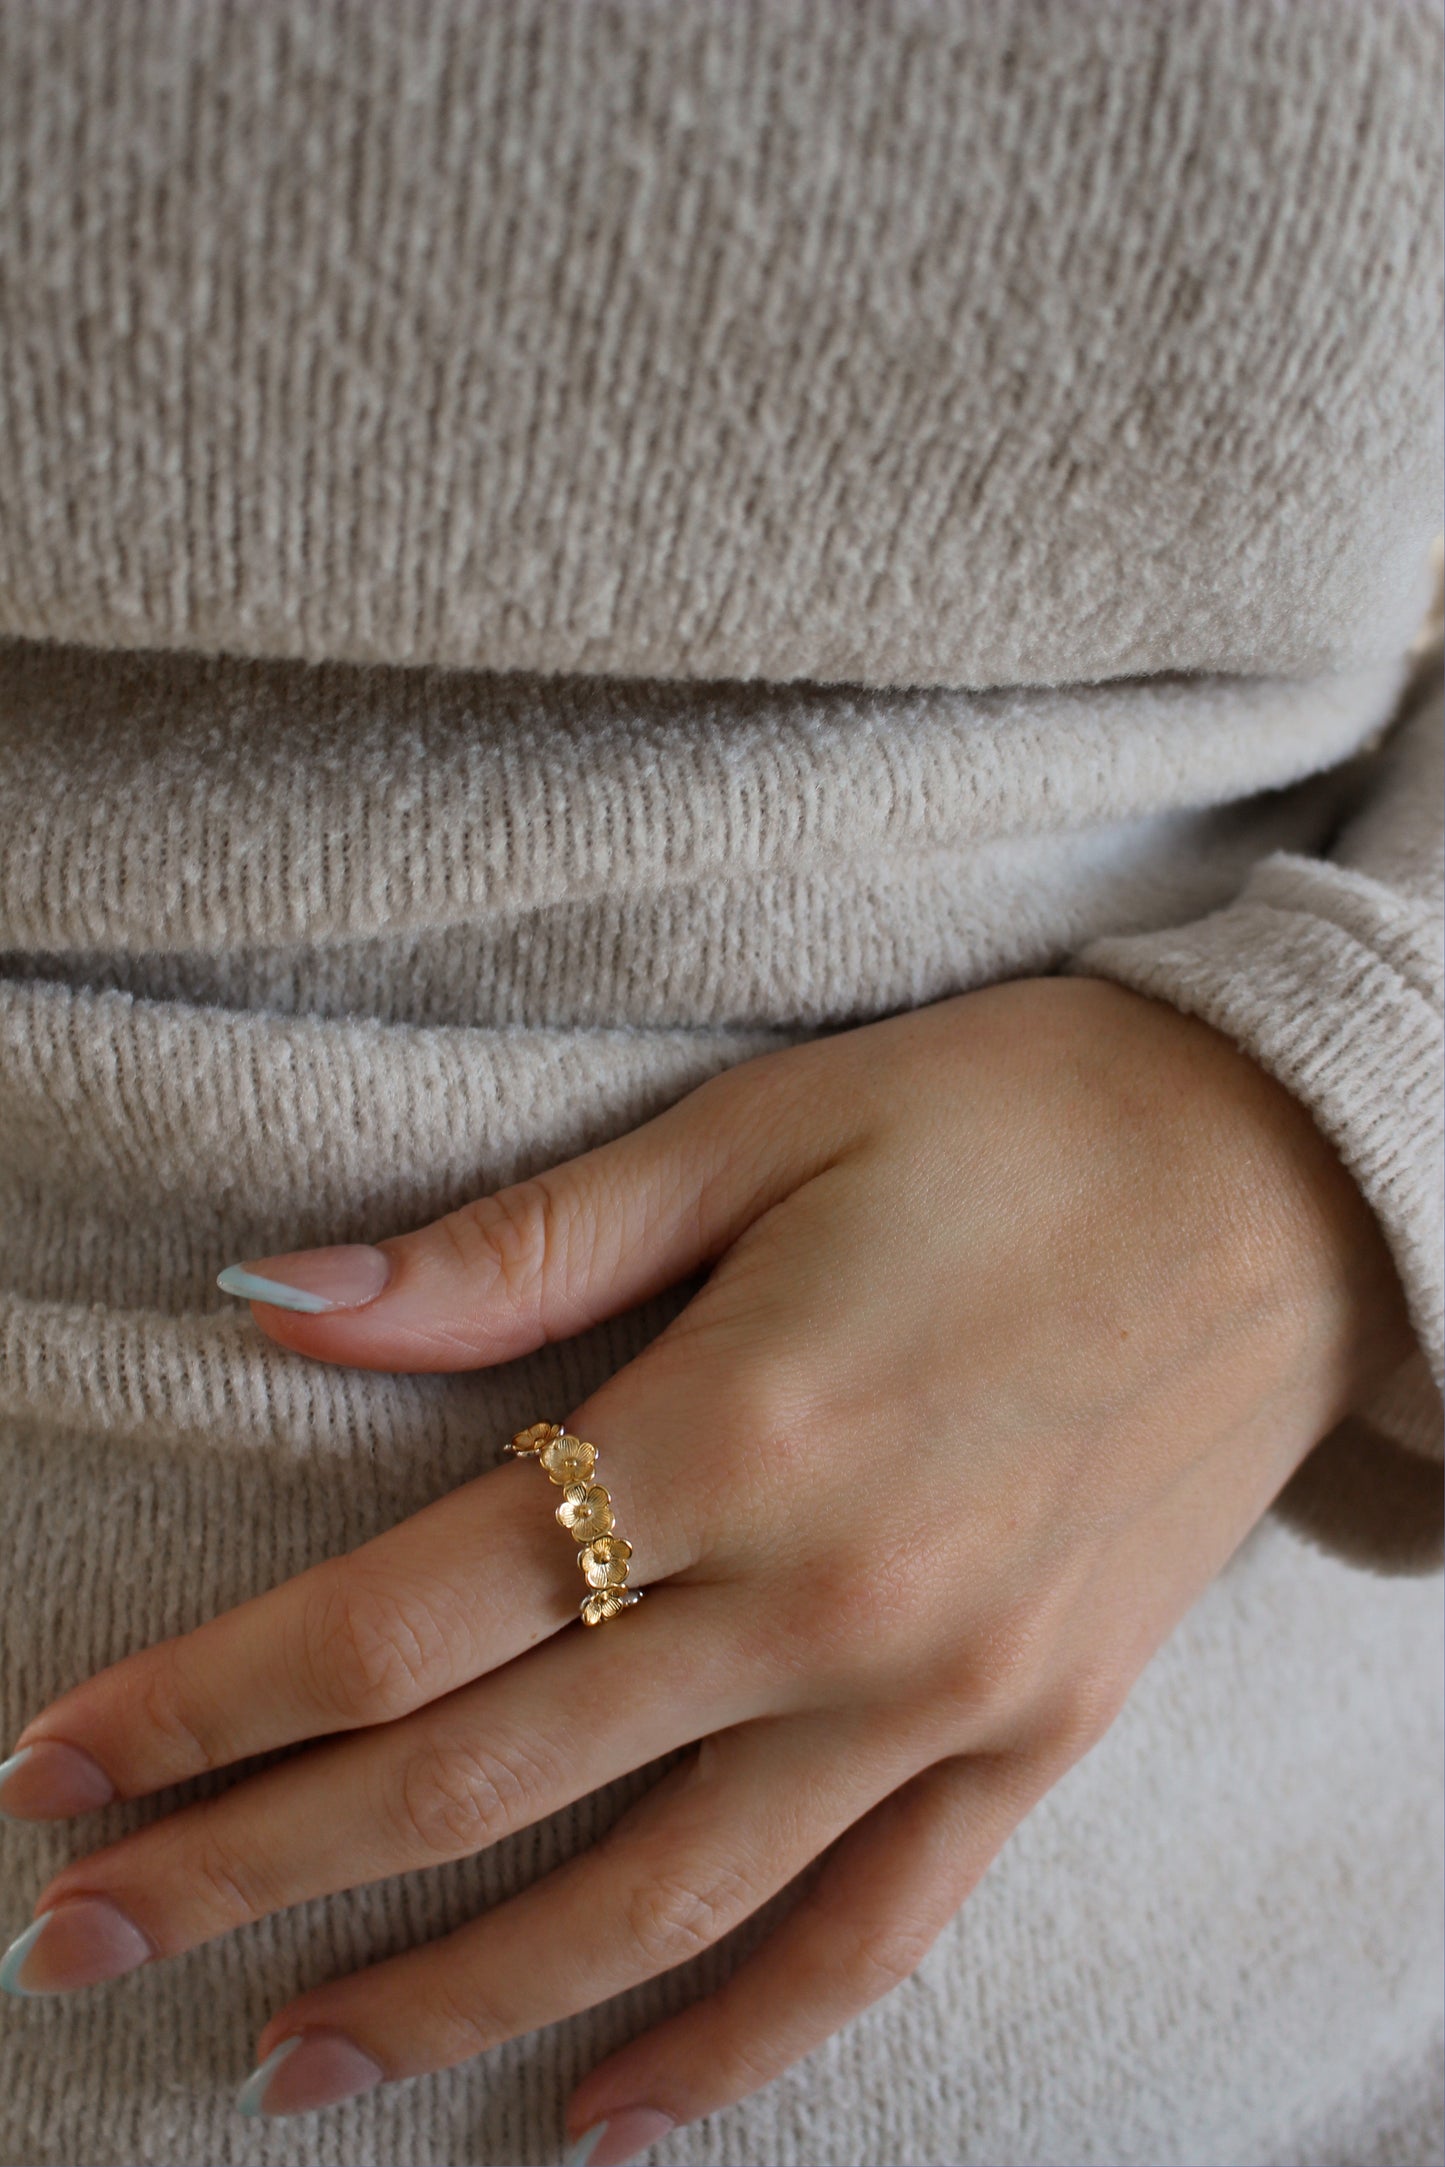 DAISY ∙ 925 Sterling Silver Flower Ring ∙18k Gold Ring ∙ Thick Band ∙ Adjustable Ring ∙ Gift for Mom ∙ Creation Megane